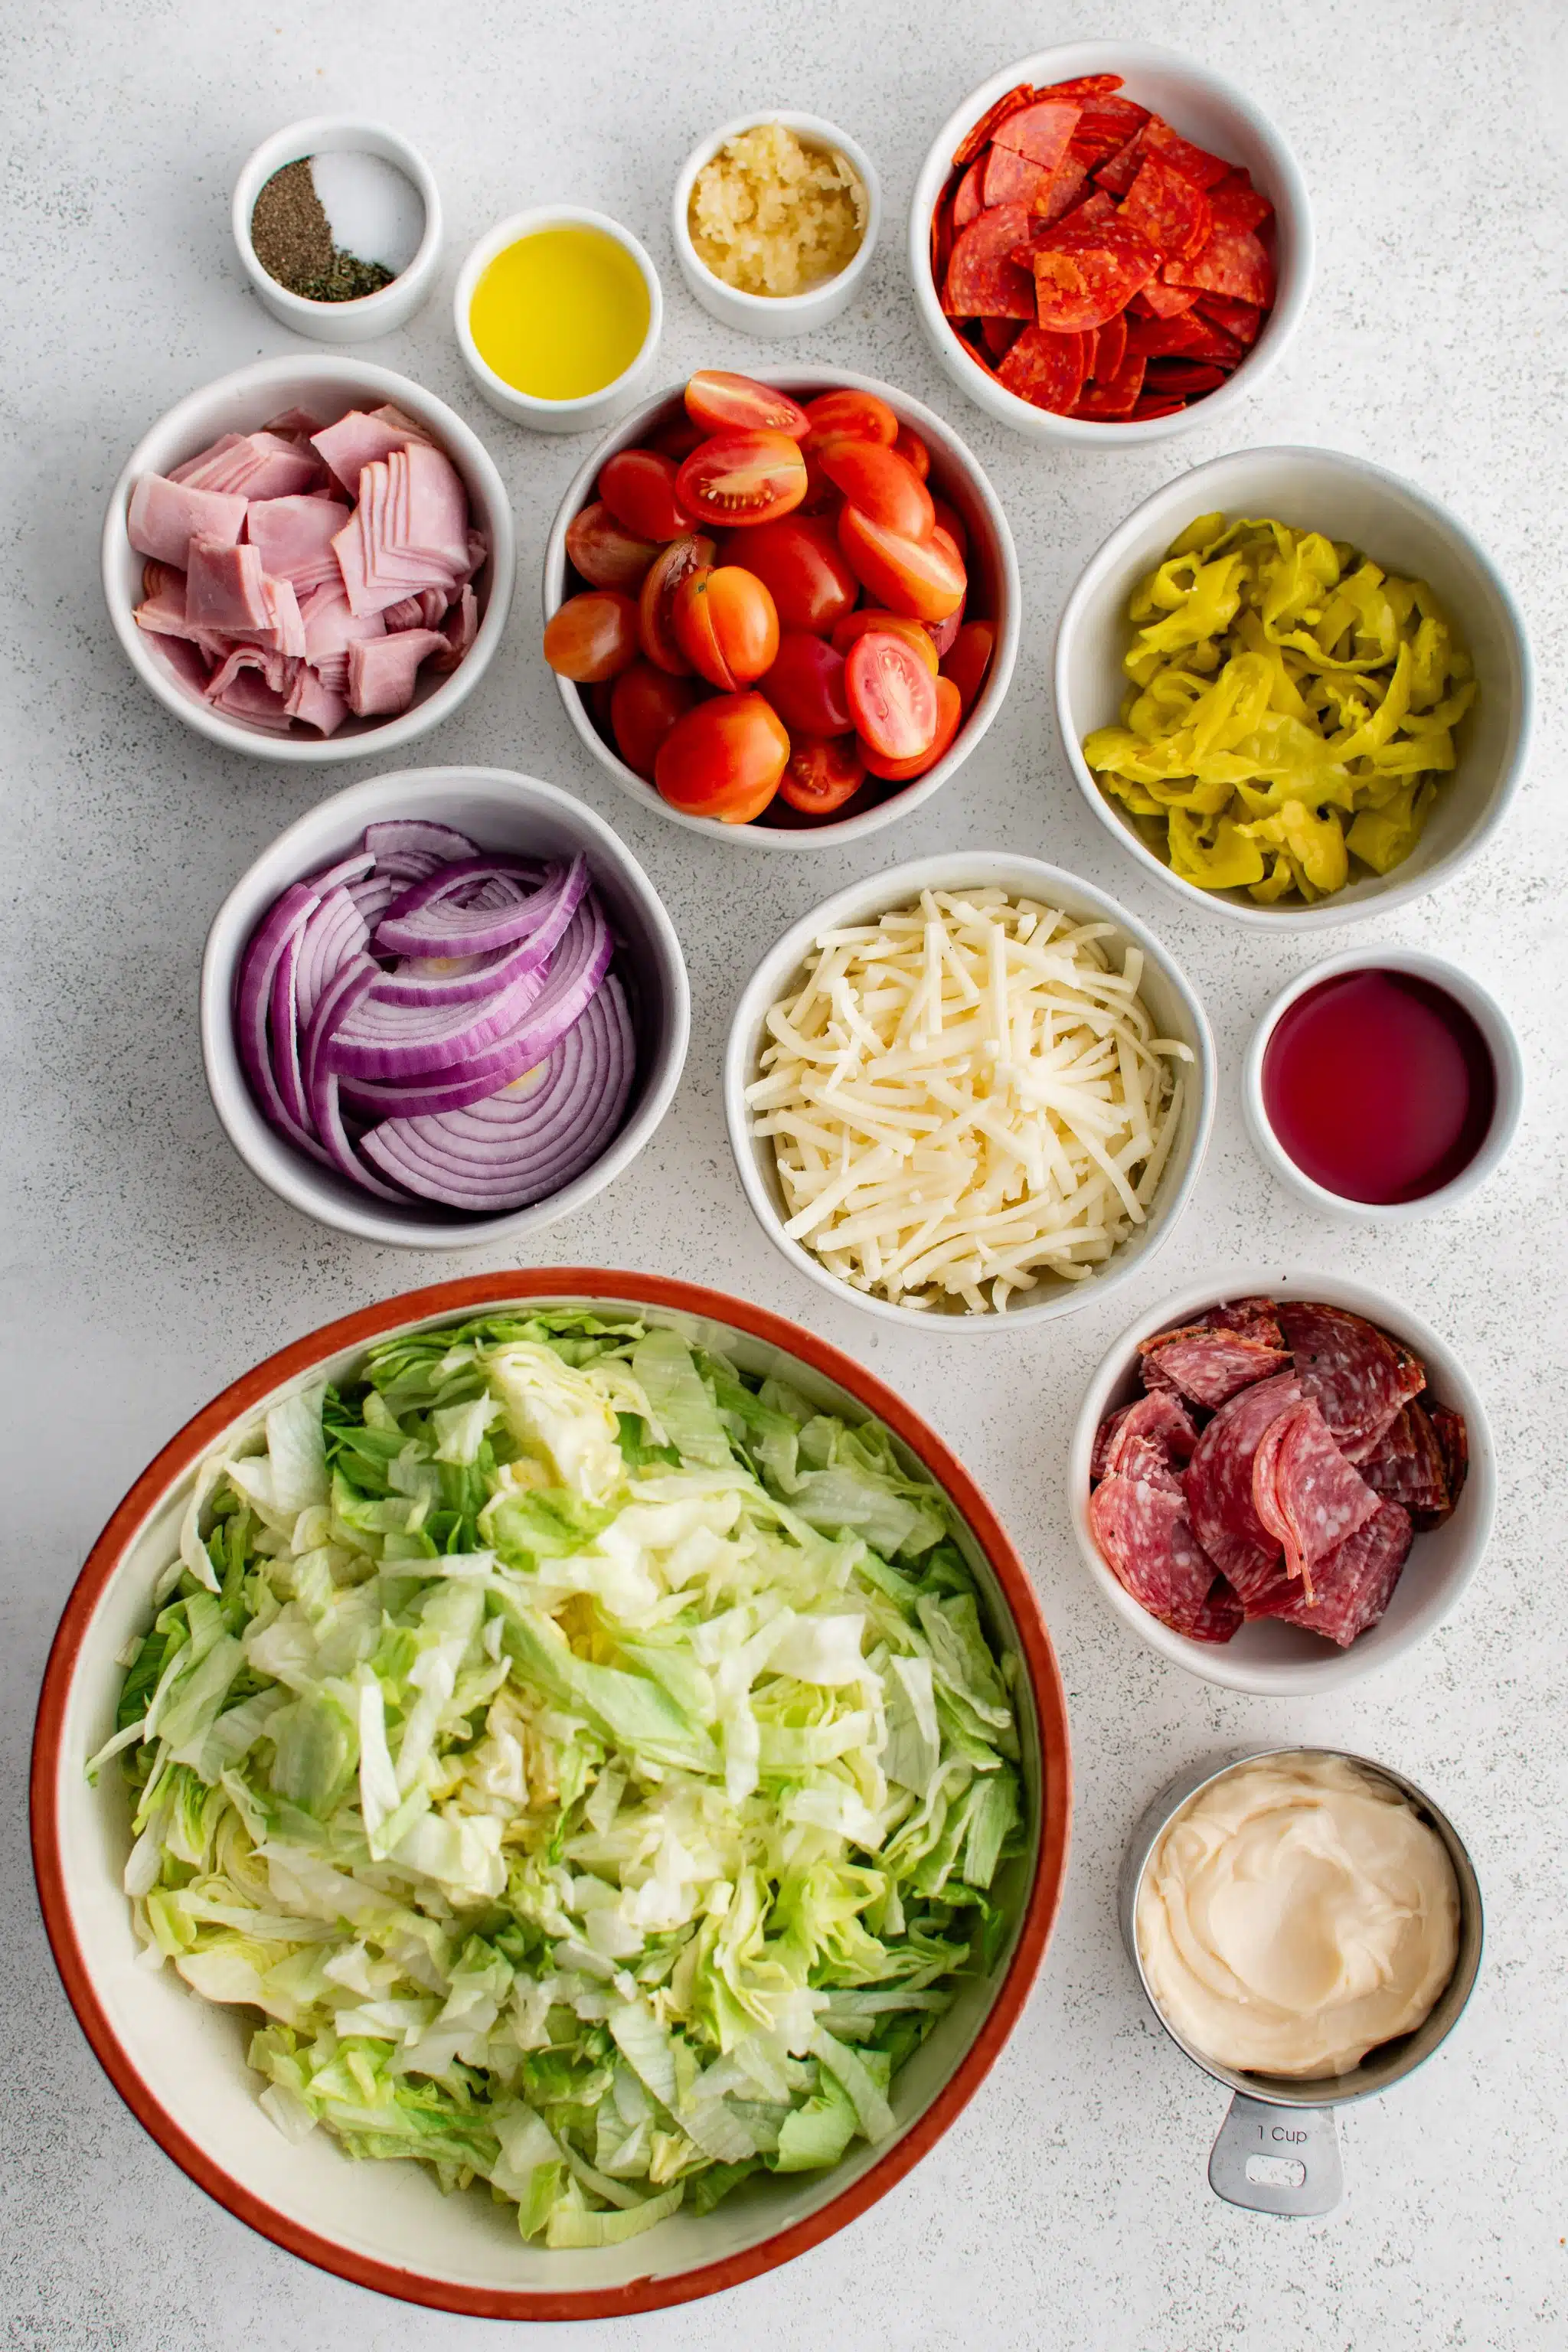 All of the ingredients for Grinder Salad presented in individual measuring cups and ramekins.